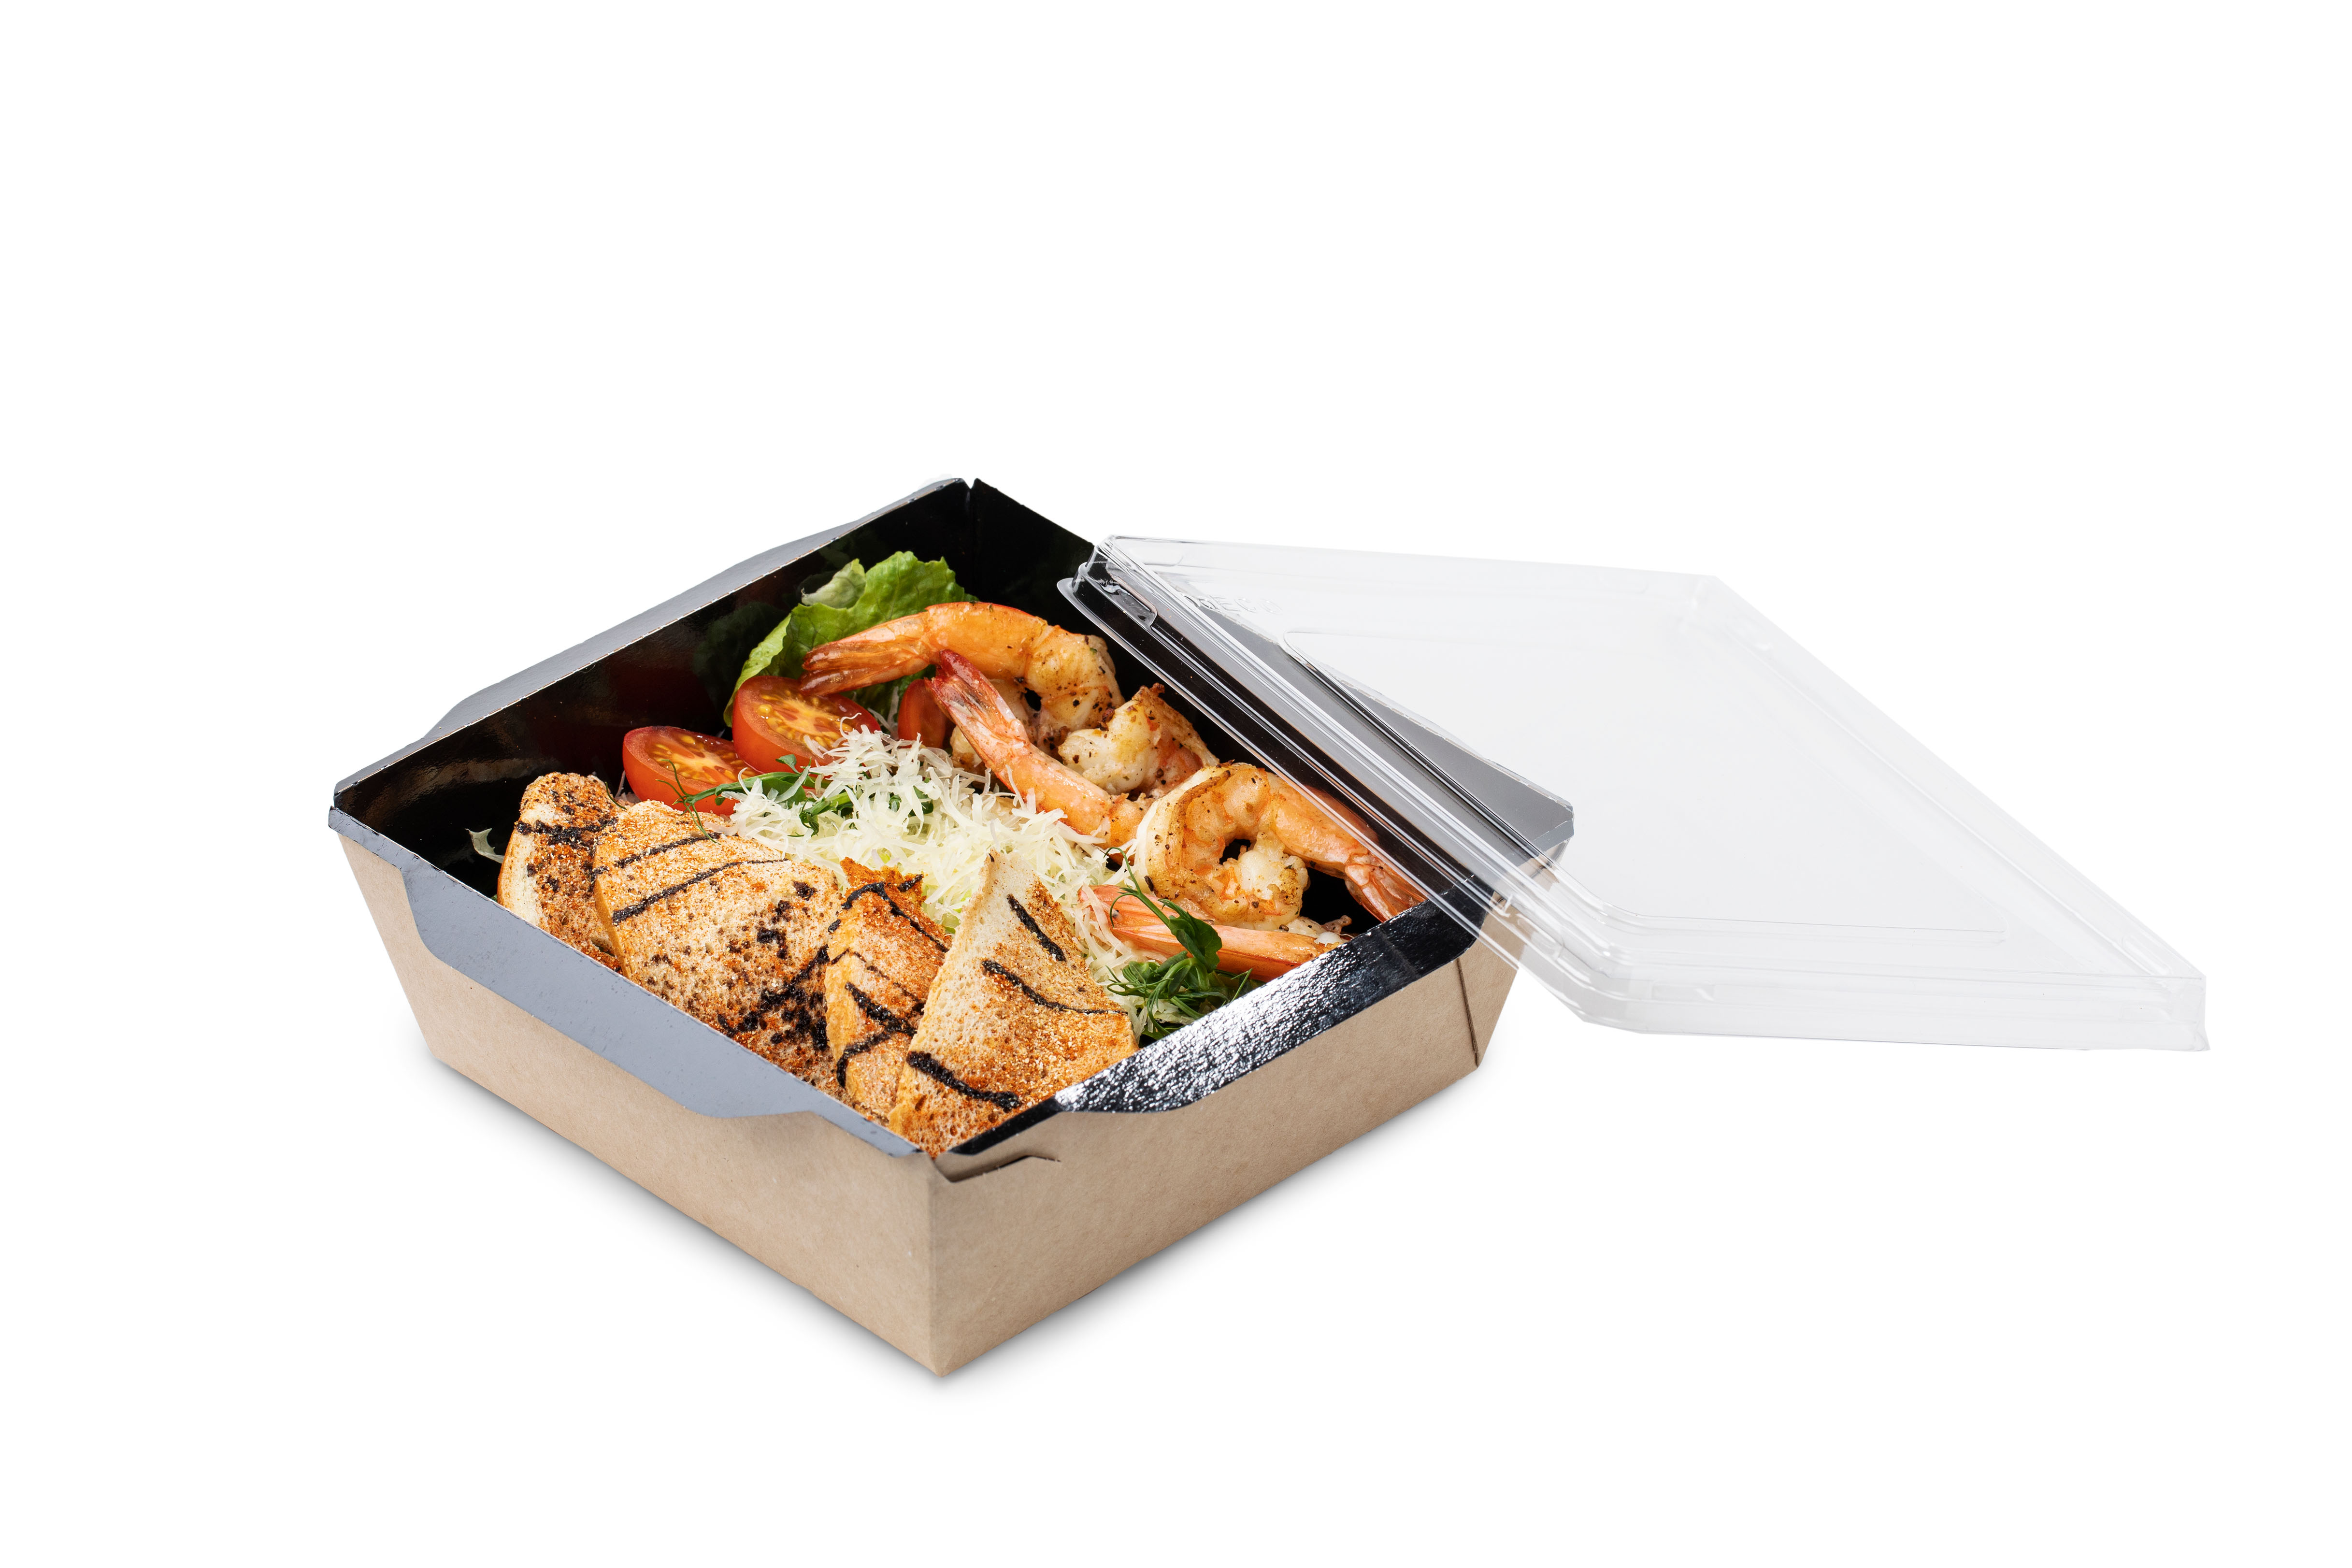 Salad bowls OSQ OPSALAD 1000 BE with transparent lid Black Edition